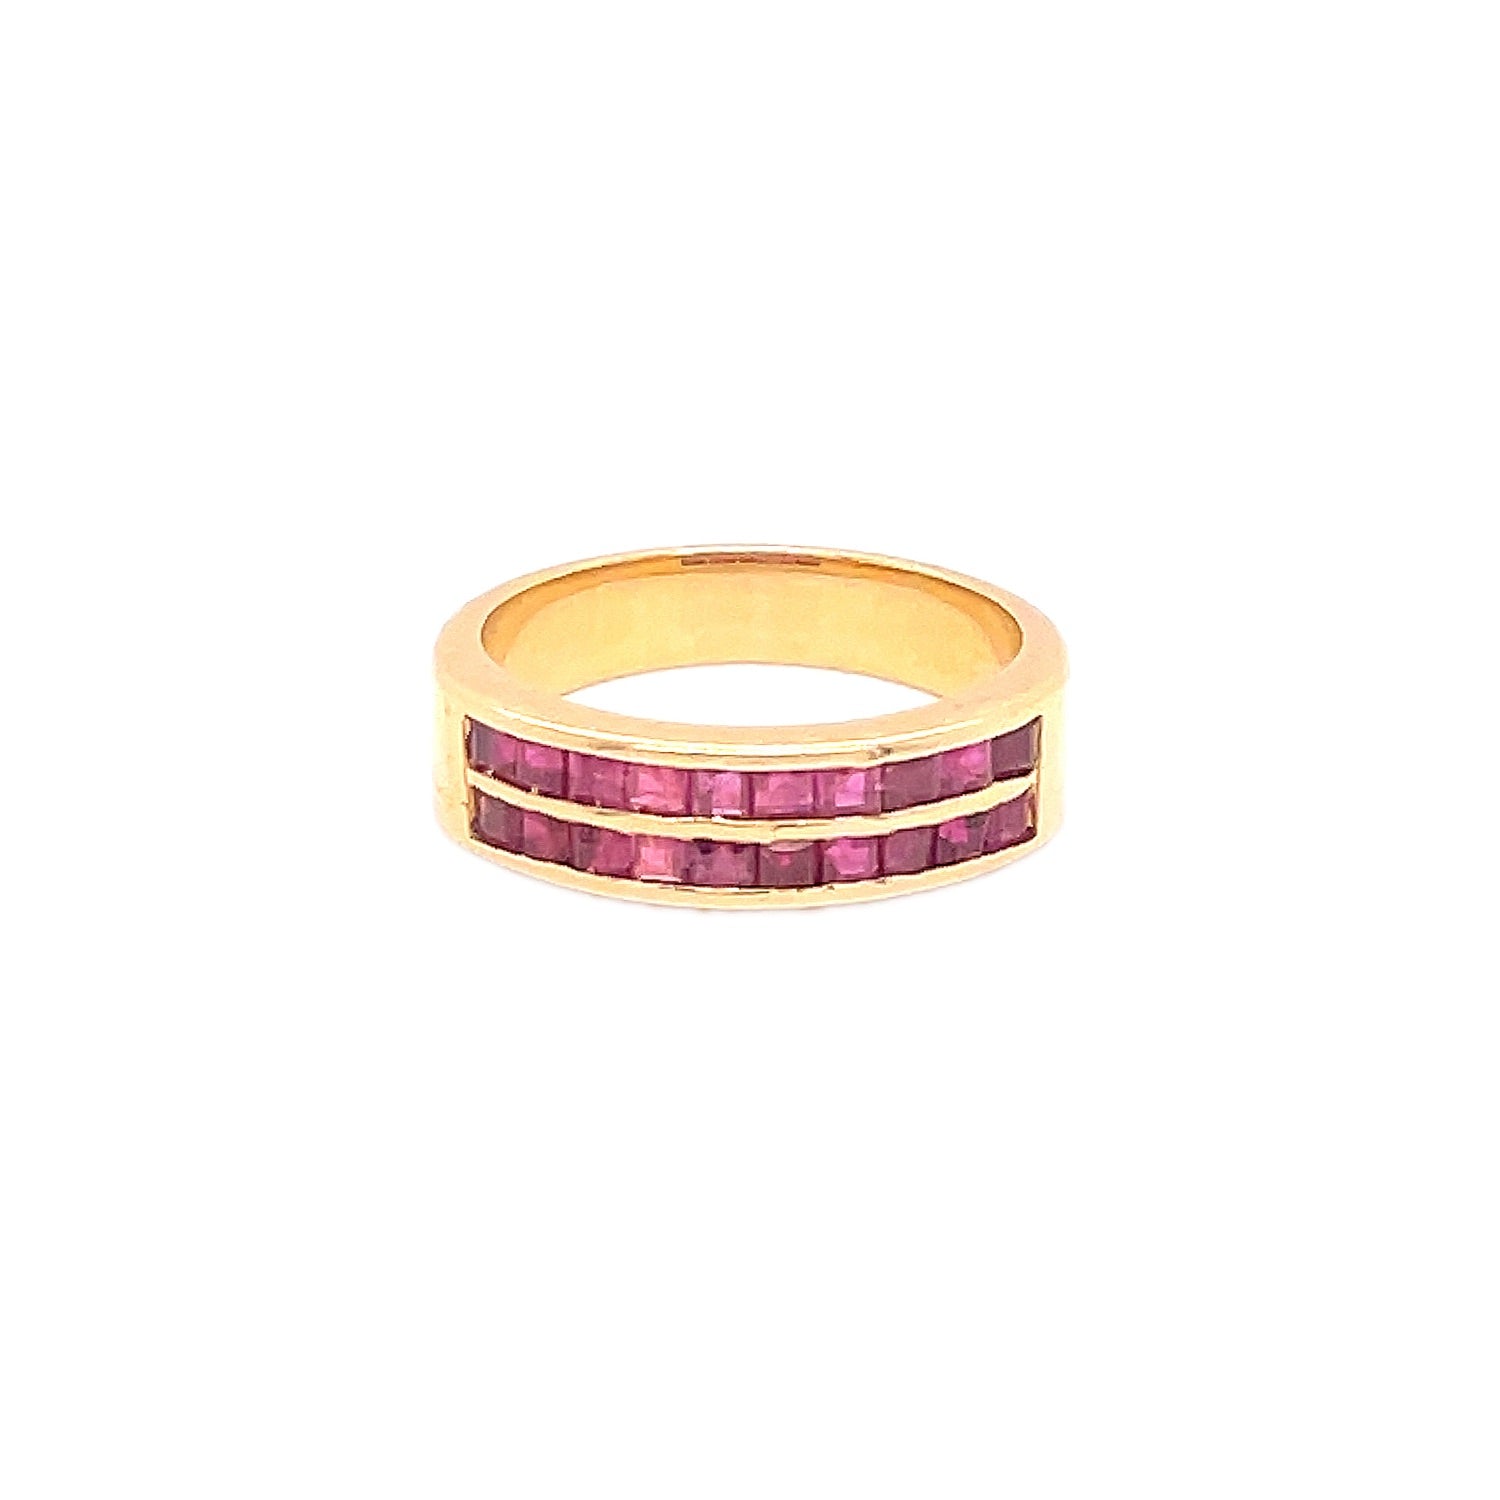 Gold ring with channel-set pink stones for an elegant touch.